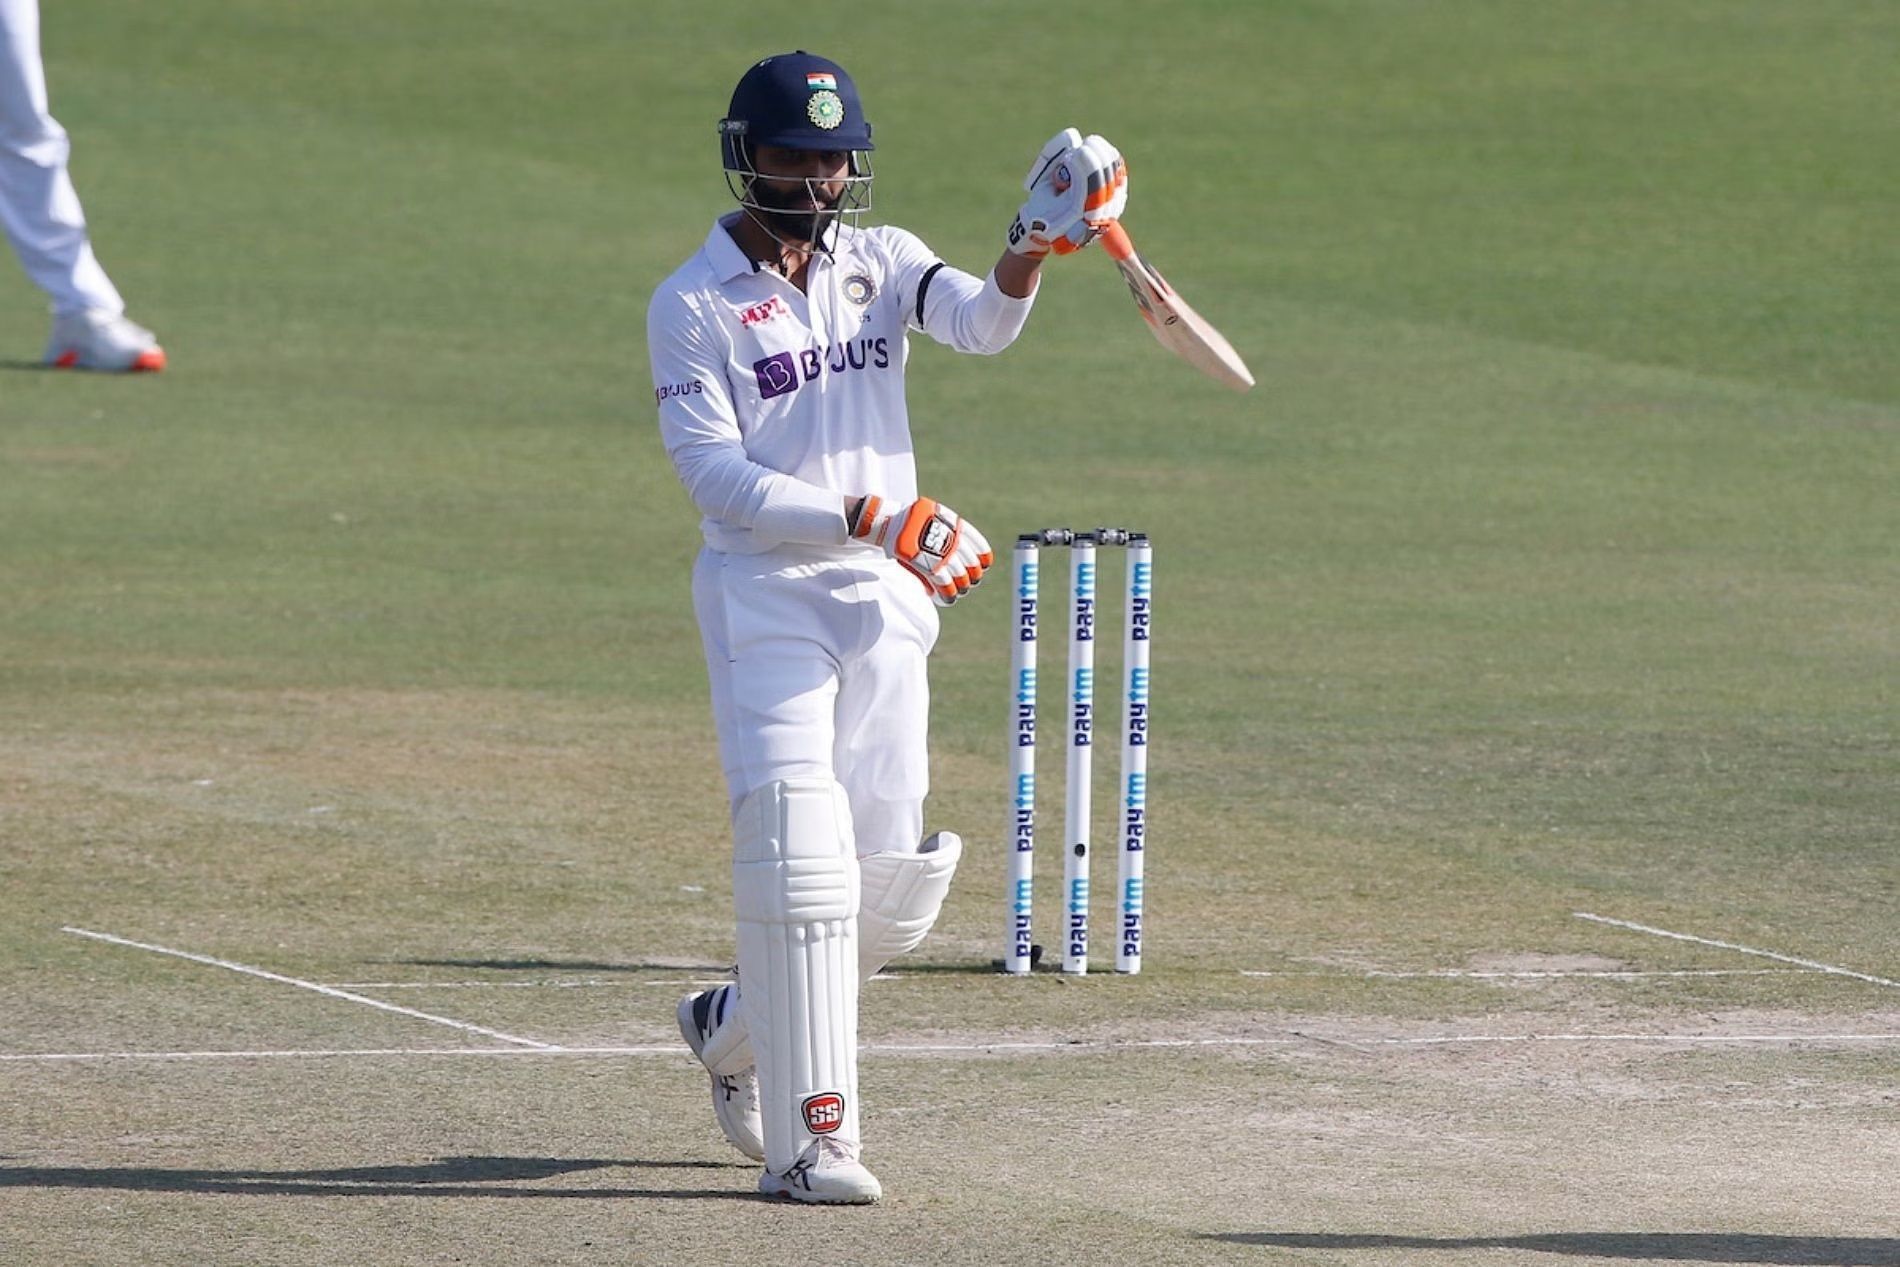 Ravindra Jadeja has been in outstanding form in Test cricket lately. [P/C: BCCI]